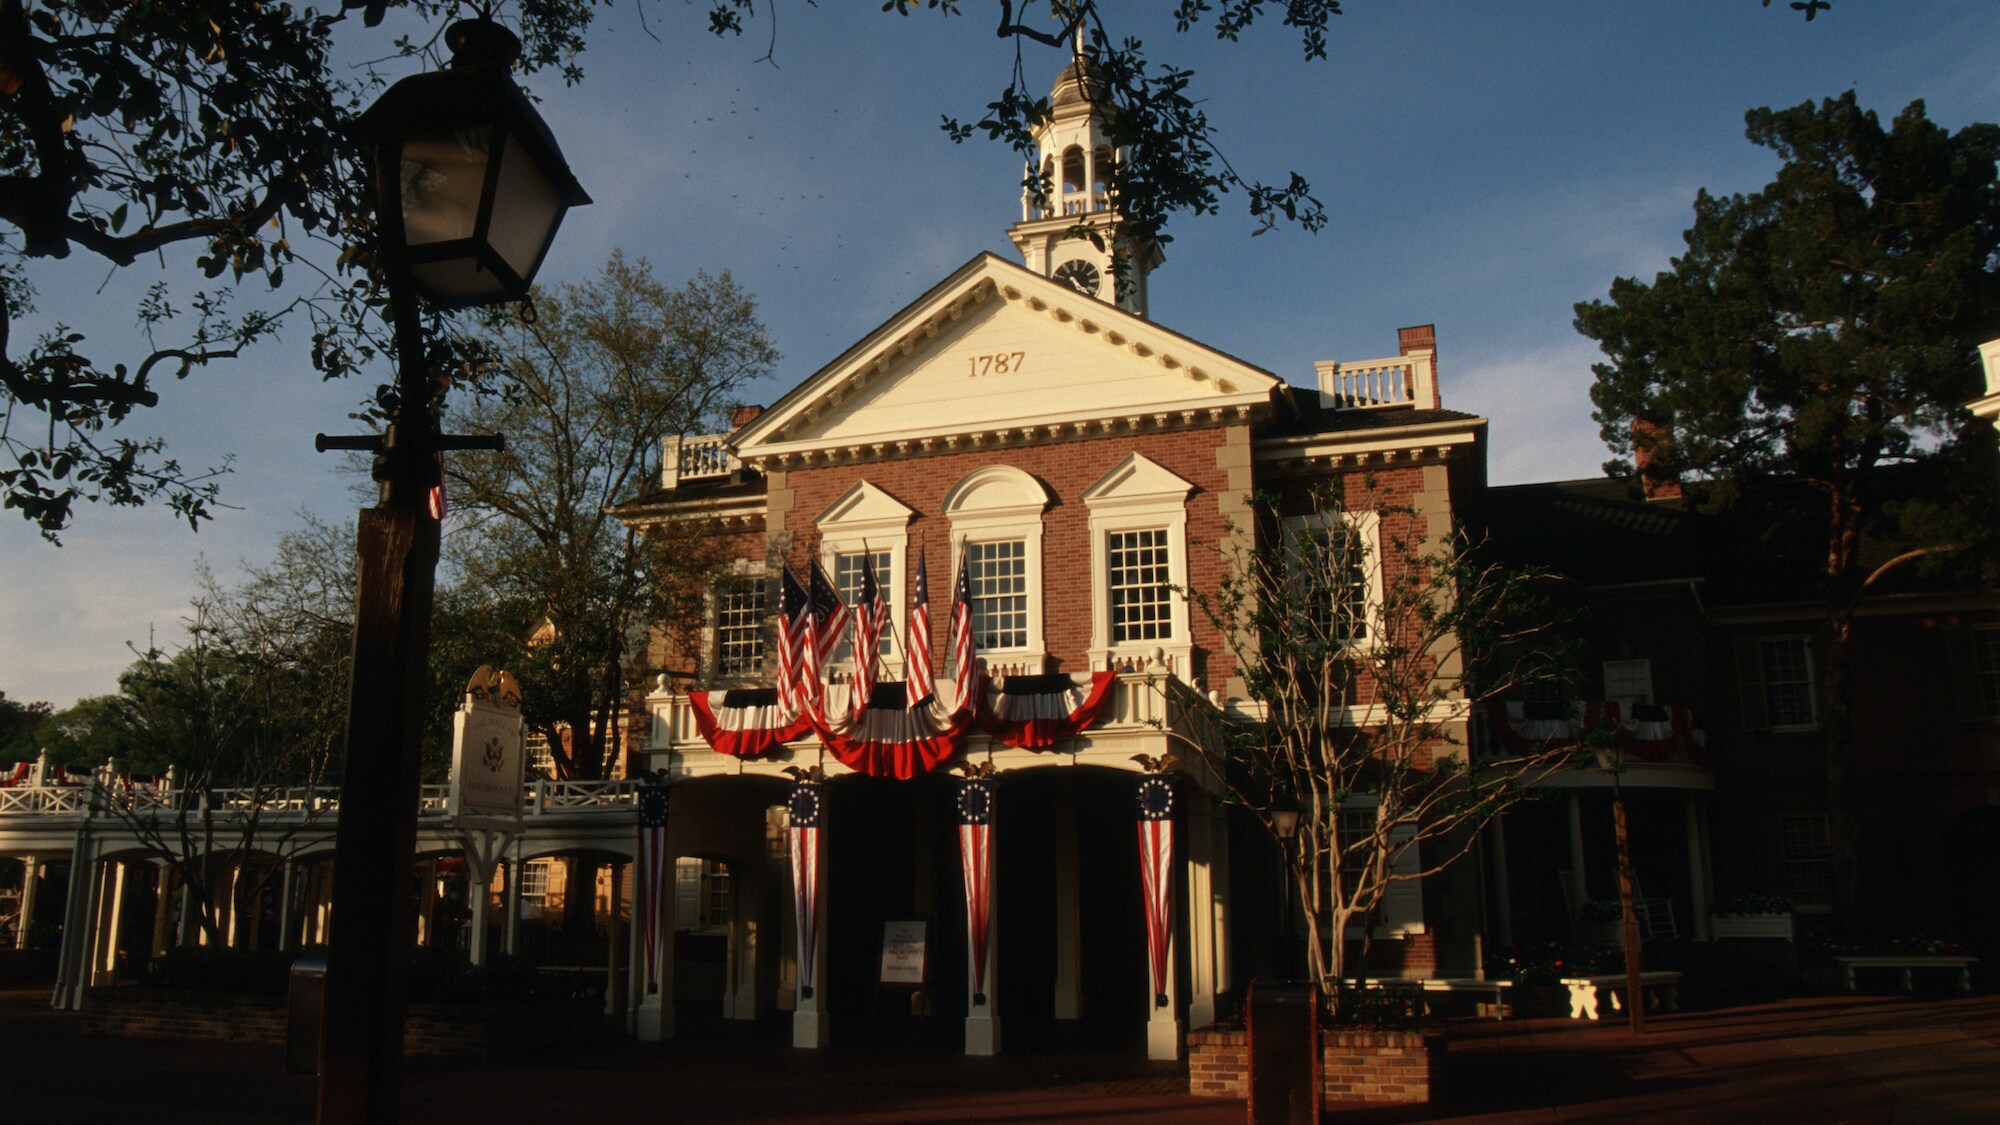 Image of The Hall of Presidents building exterior.